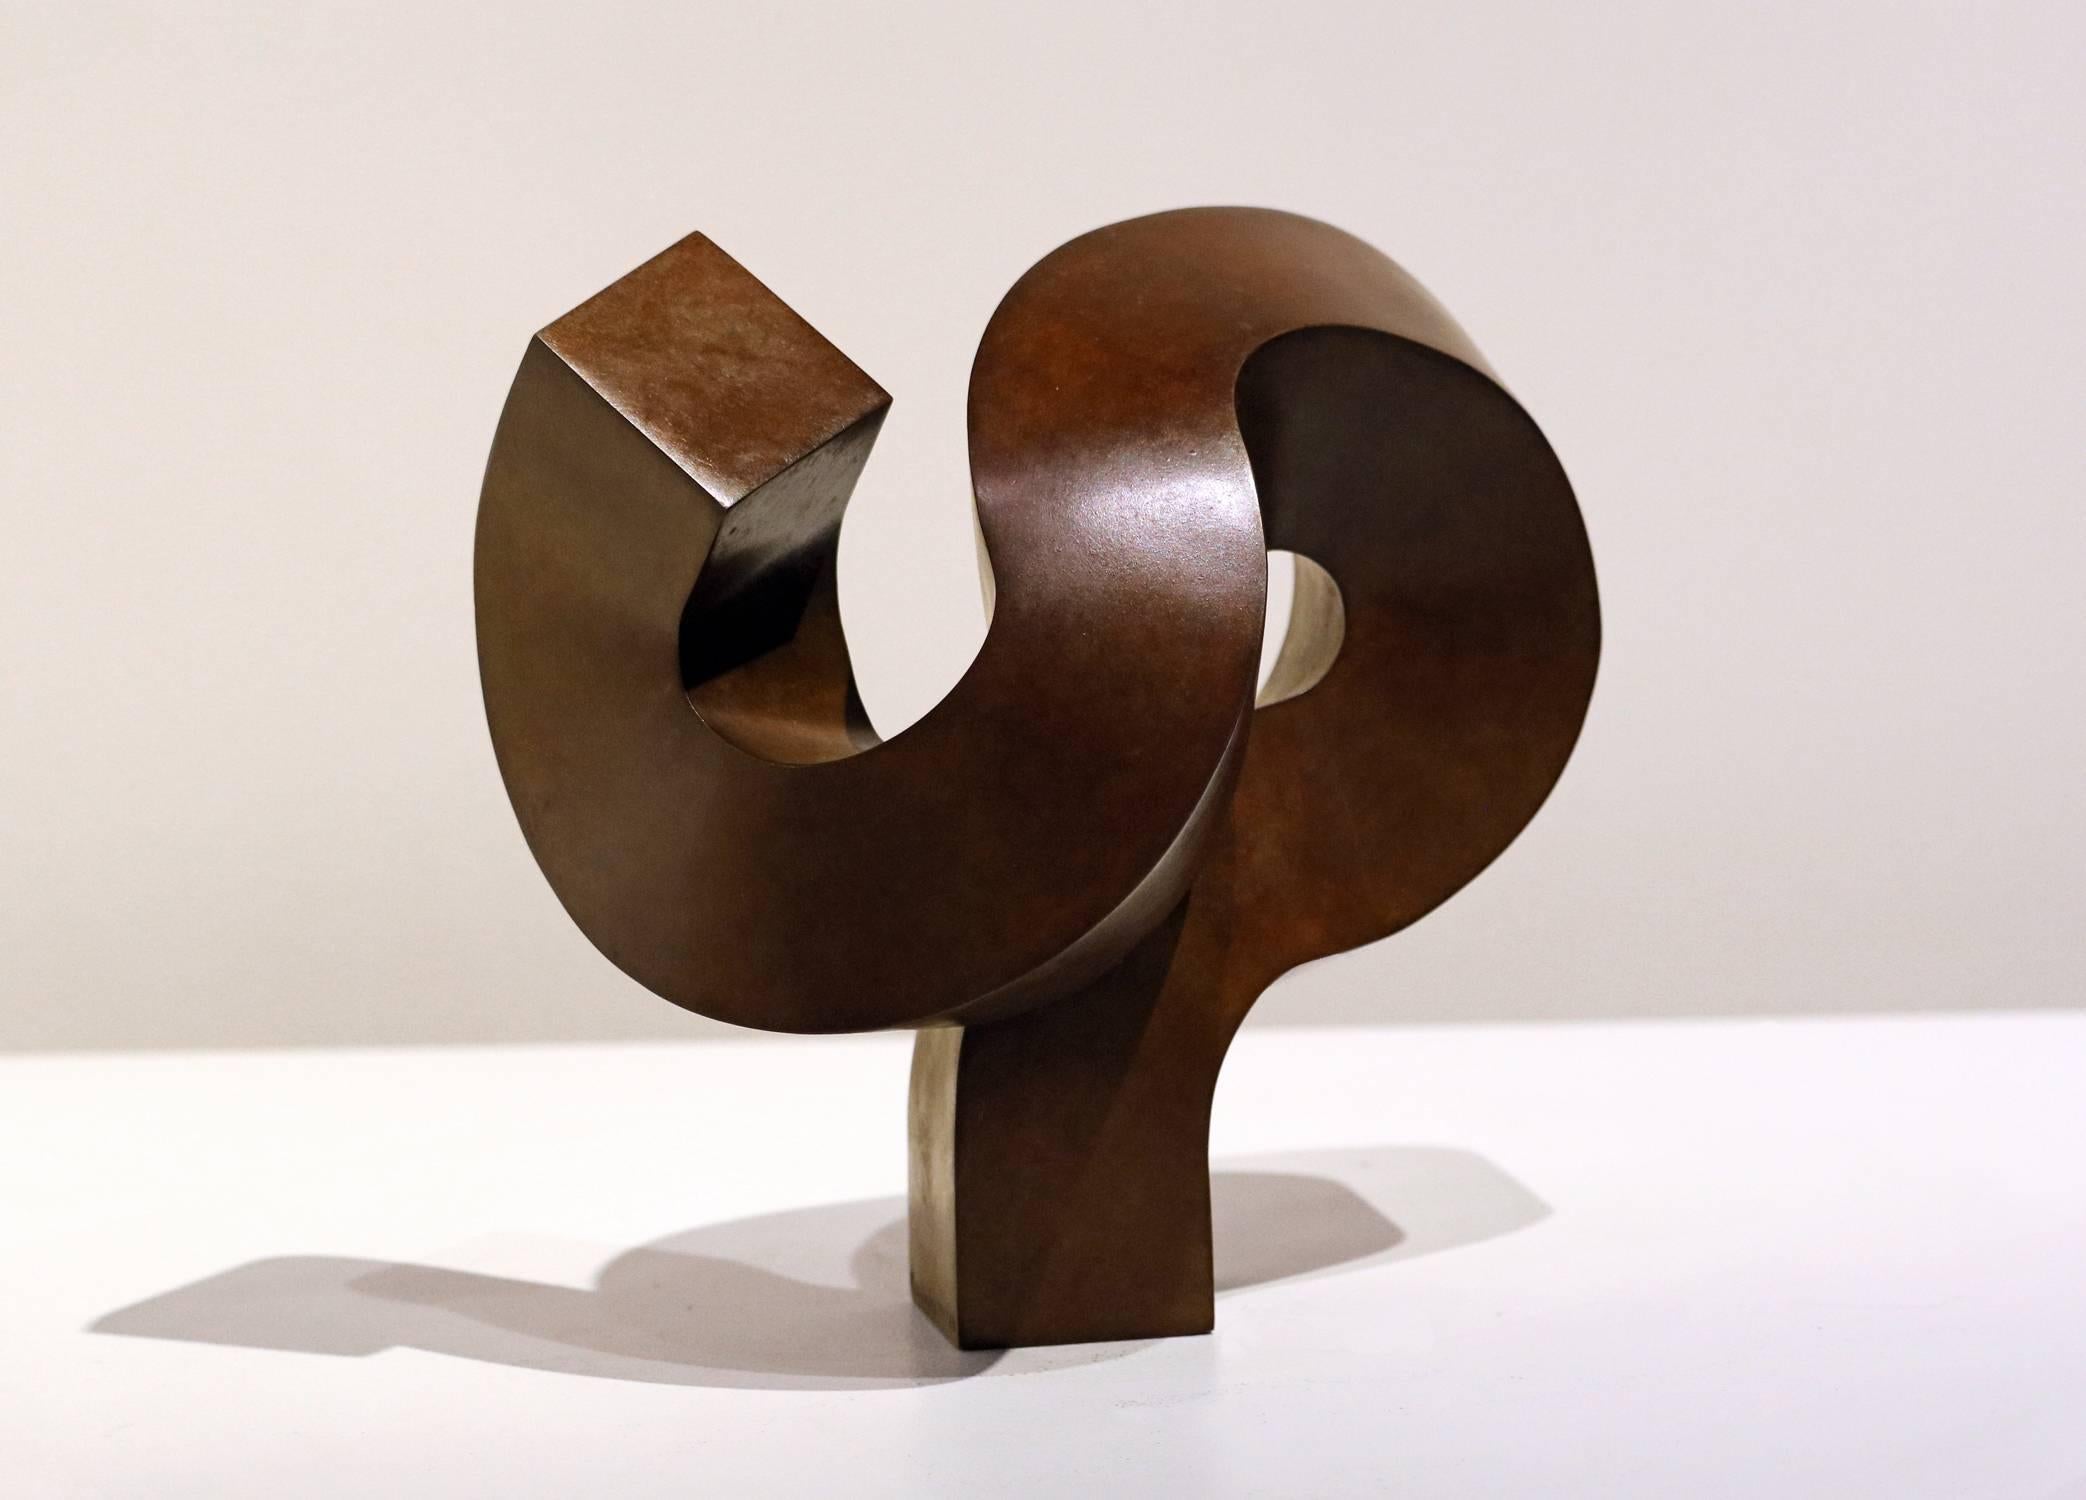 Delaunay's Dilemma - Sculpture by Clement Meadmore